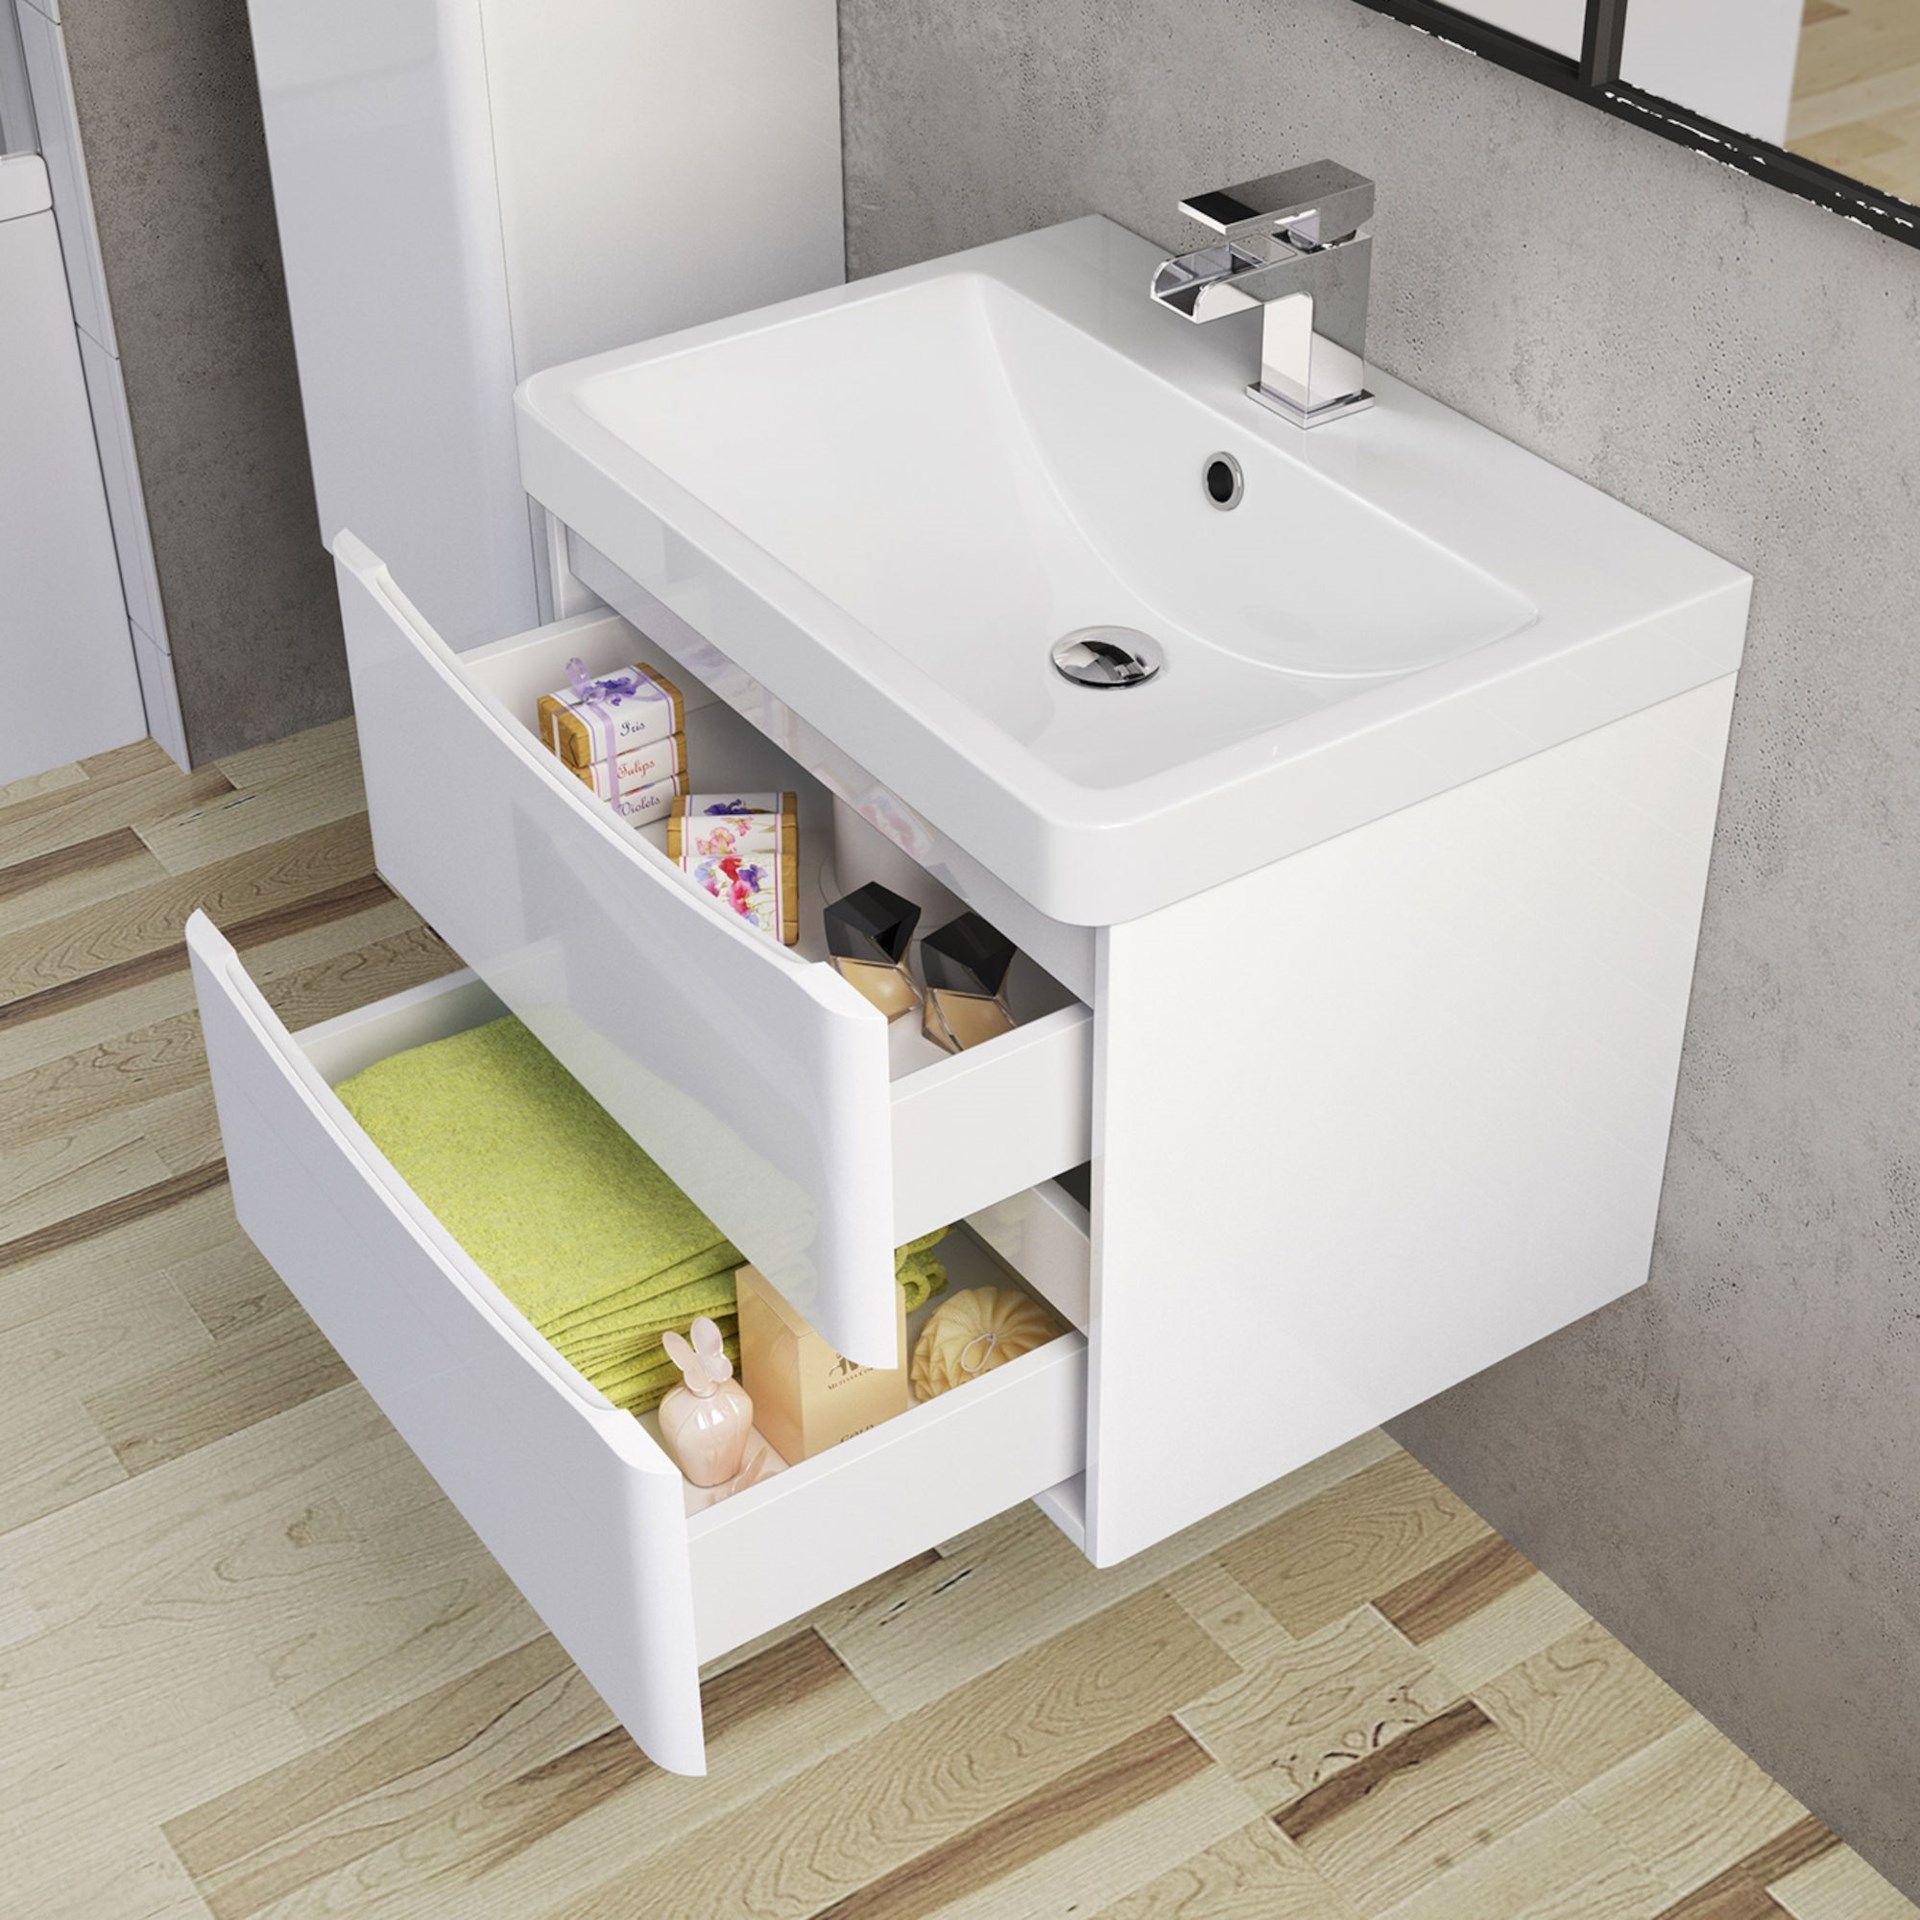 New & Boxed 600mm Austin Gloss White Built In Basin Drawer Unit - Wall Hung.MF2417 Rrp £749.99 - Image 3 of 3